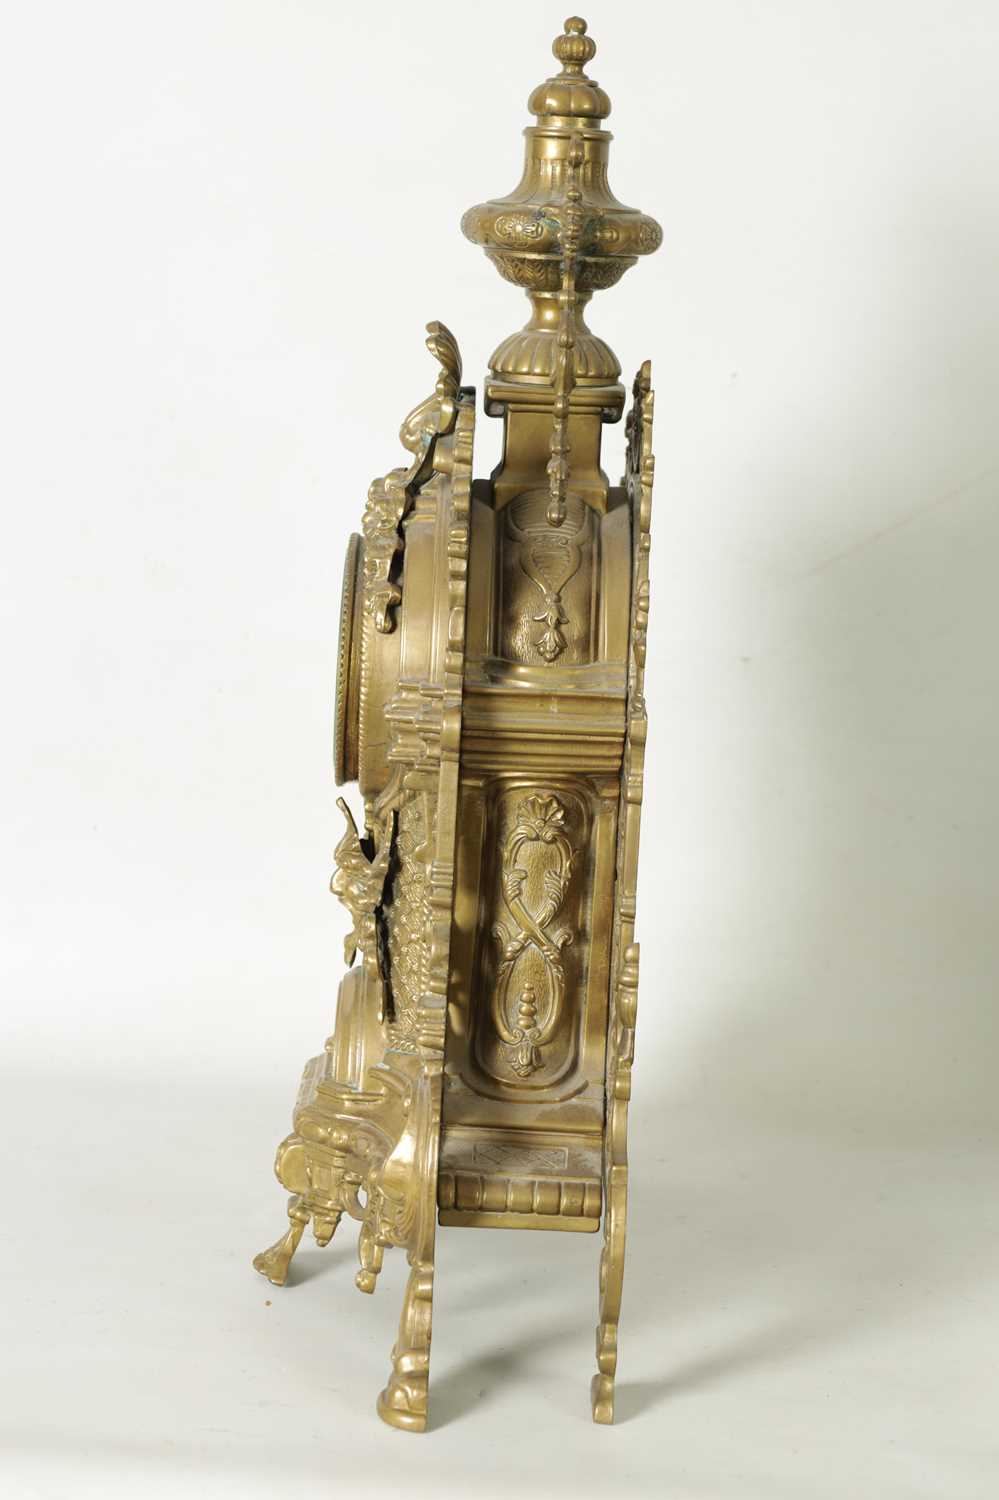 A LATE 19TH CENTURY FRENCH ORNATE AND PIERCED BRASS MANTEL CLOCK OF LARGE SIZE - Image 8 of 8